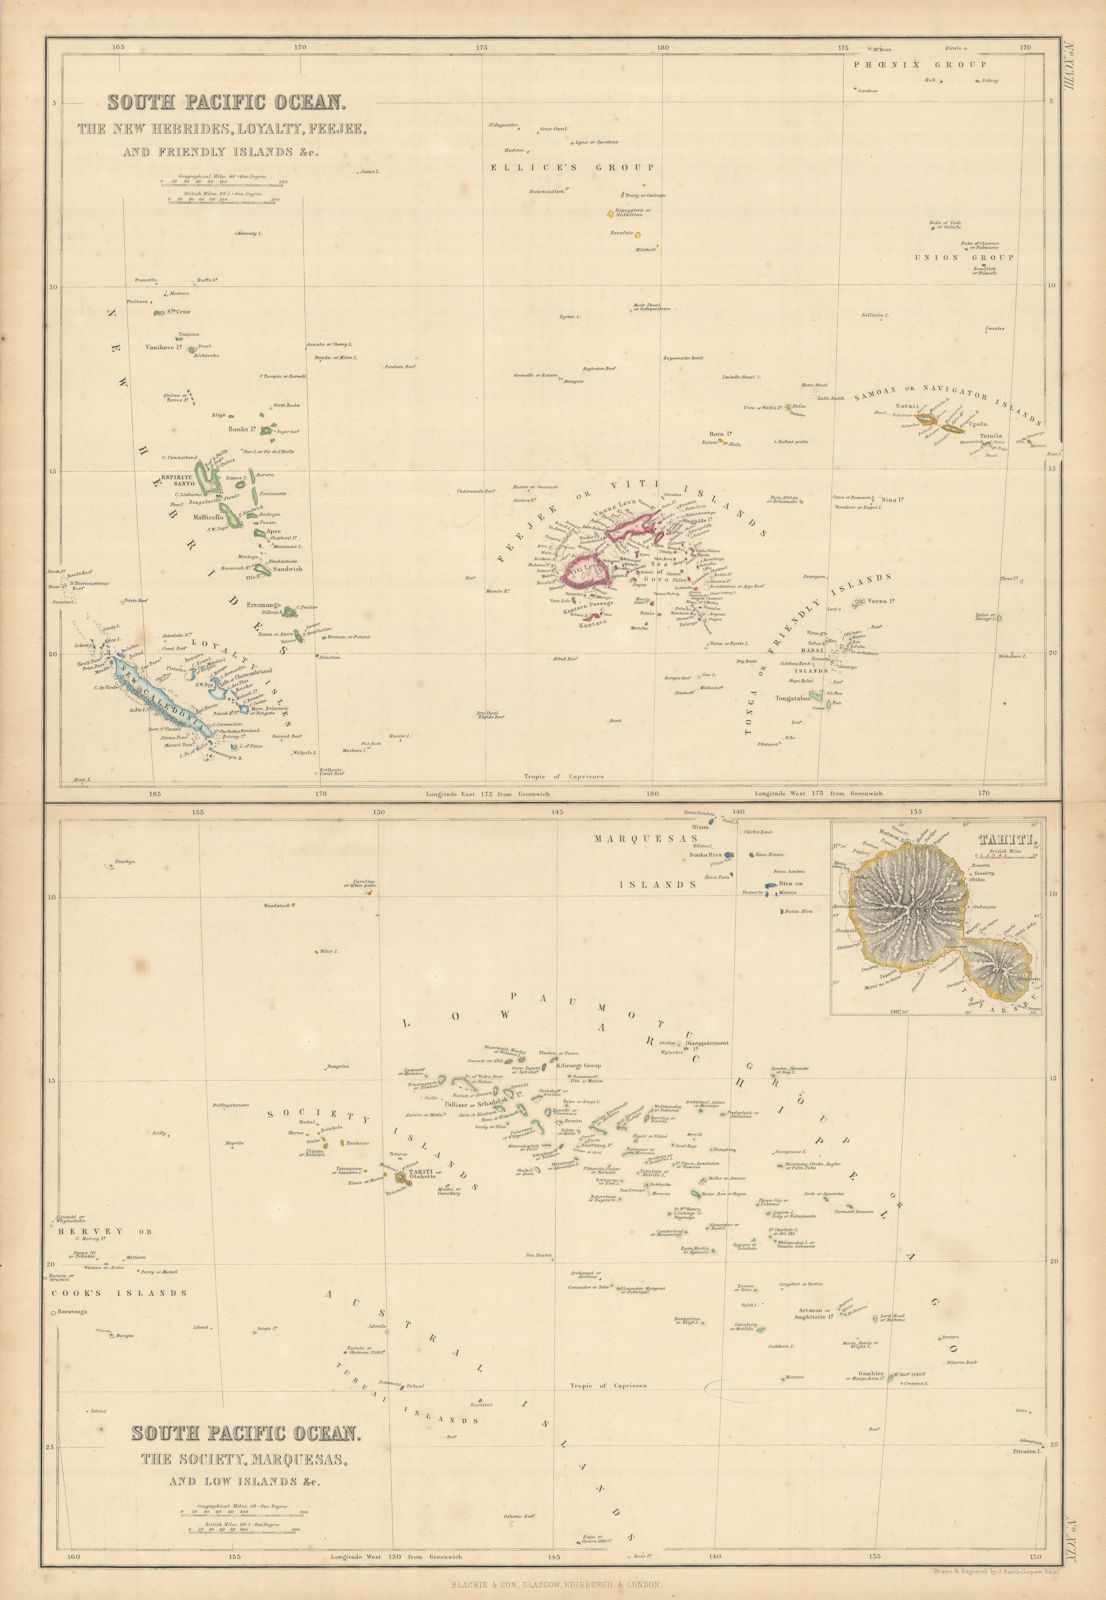 South Pacific Islands. New Hebrides Loyalty Fiji Friendly Polynesia 1860 map